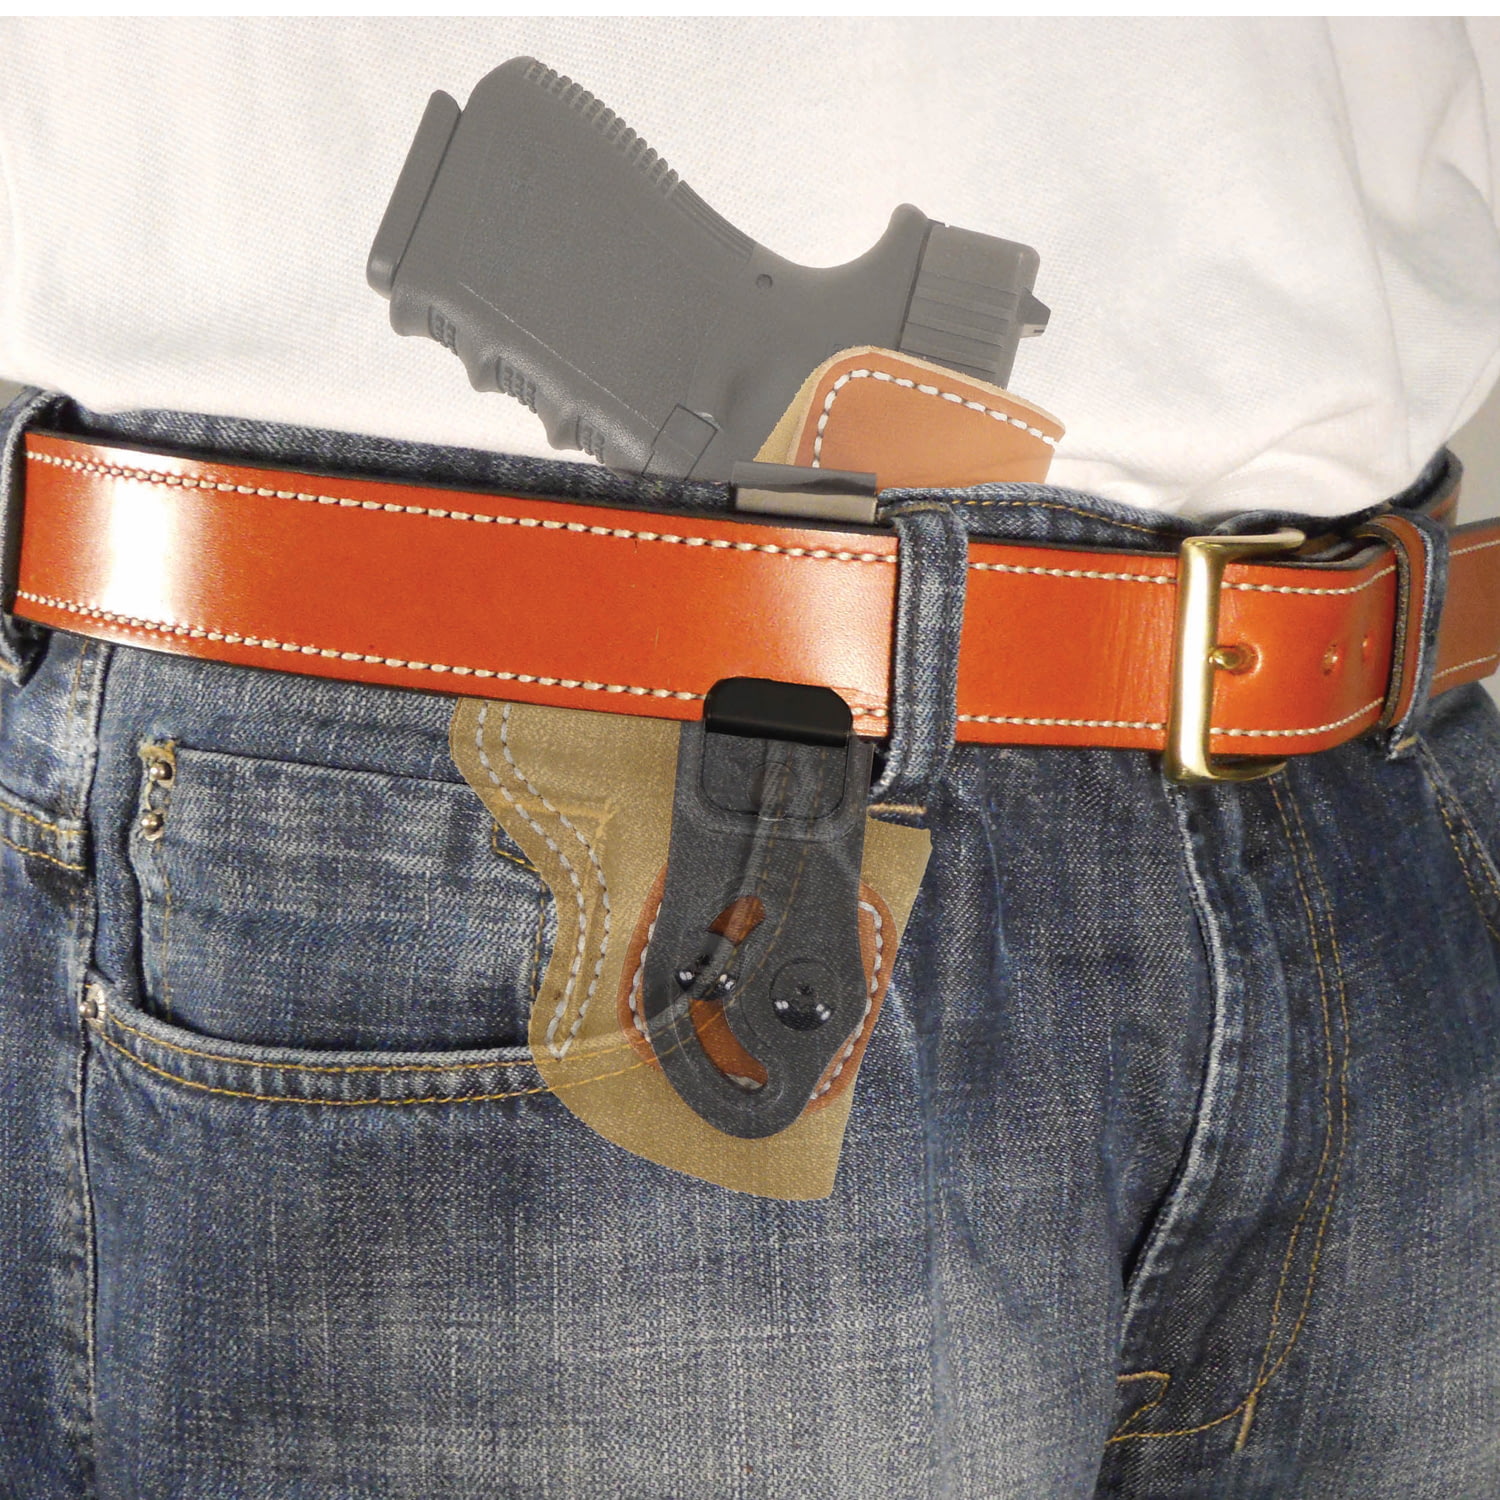 6 Concealed Carry Positions